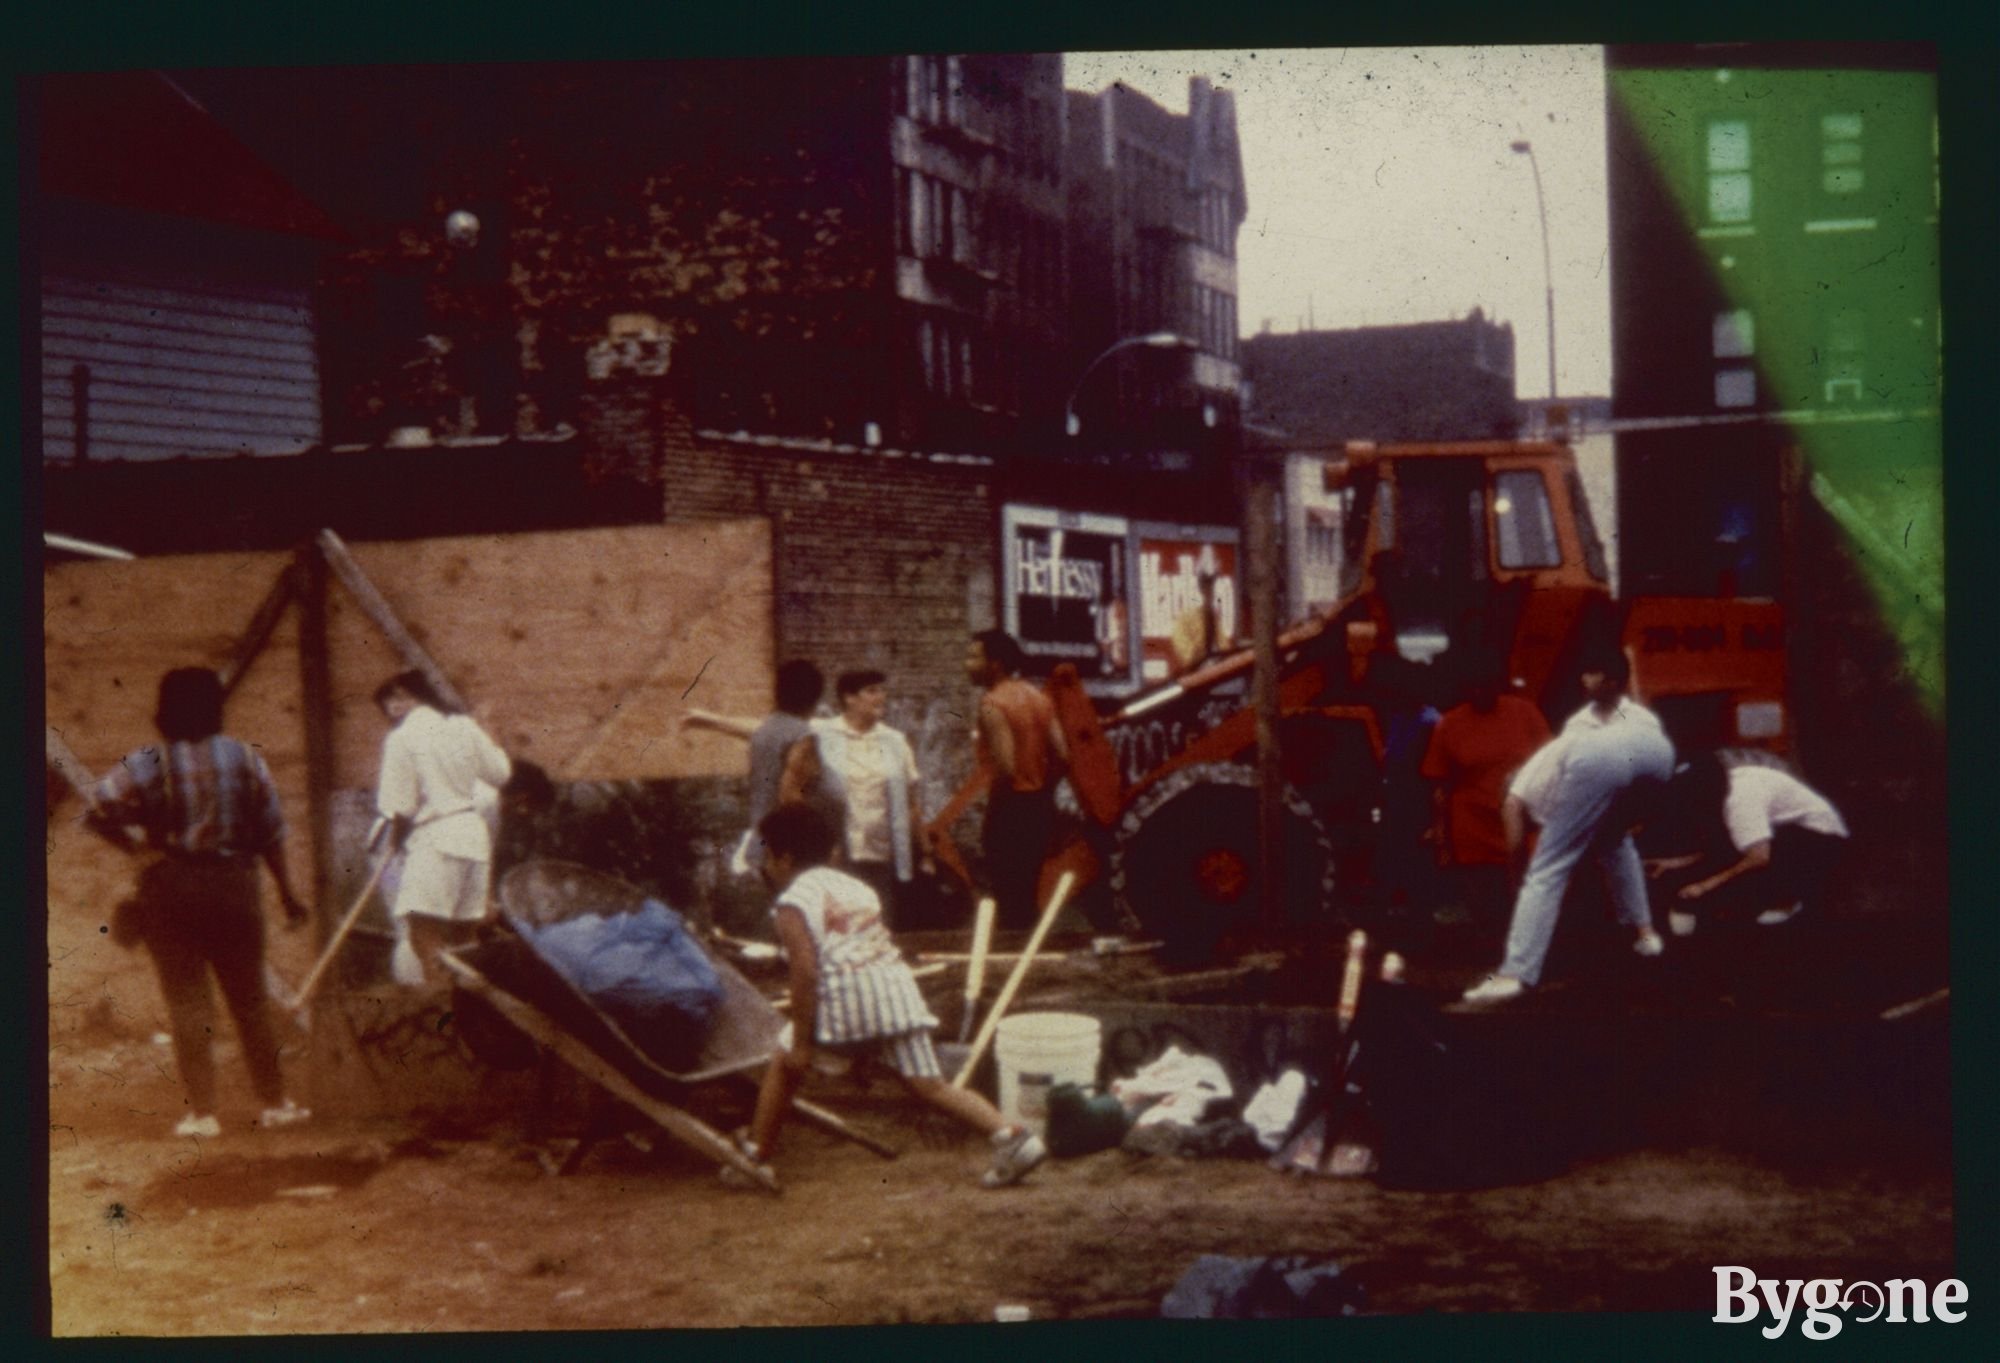 A group of people are standing and working on a building site, dressed in casual clothing. Some are in conversation, others crouched down in front of an orange tractor, whilst another is readying themselves to lift a wheelbarrow containing a heavy load. The dig is situated in a street with urban buildings surrounding it.